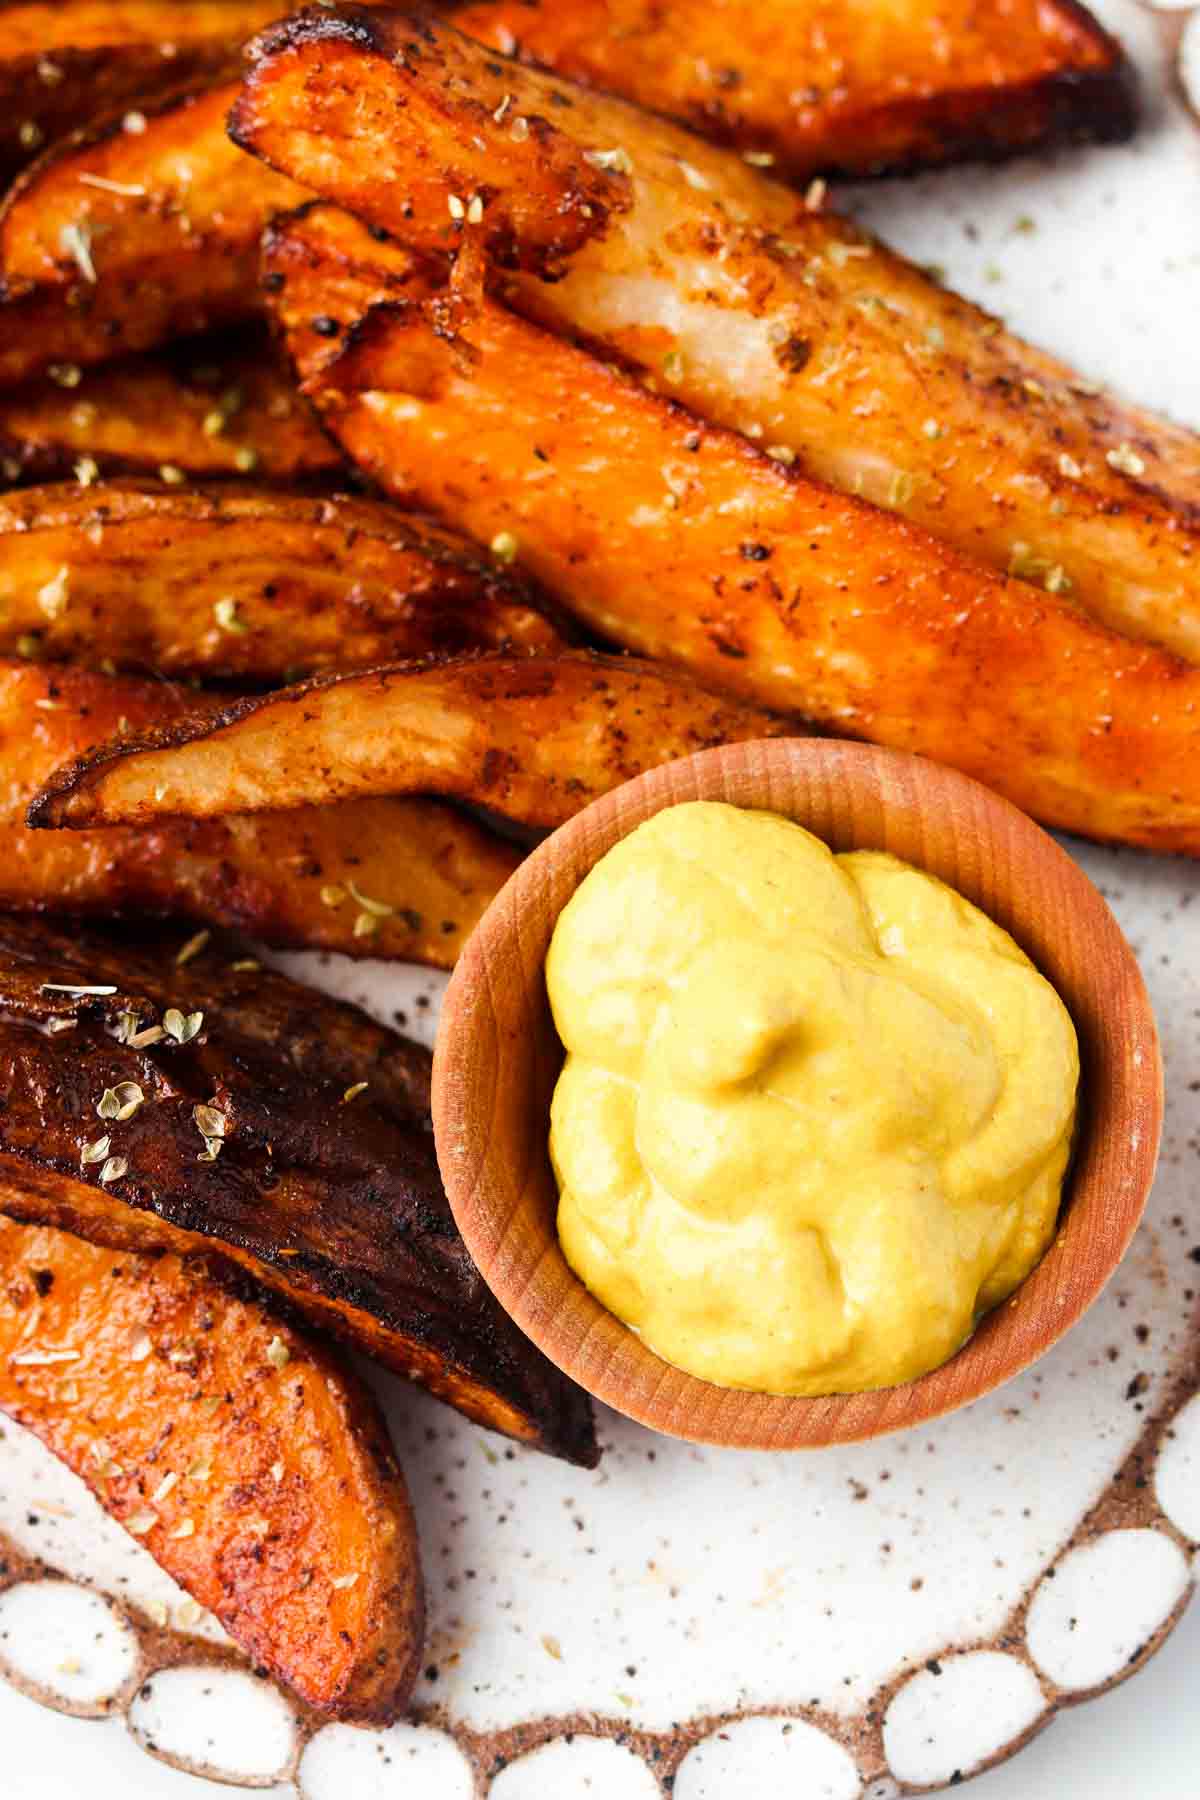 Mustard with air fryer potato wedges.